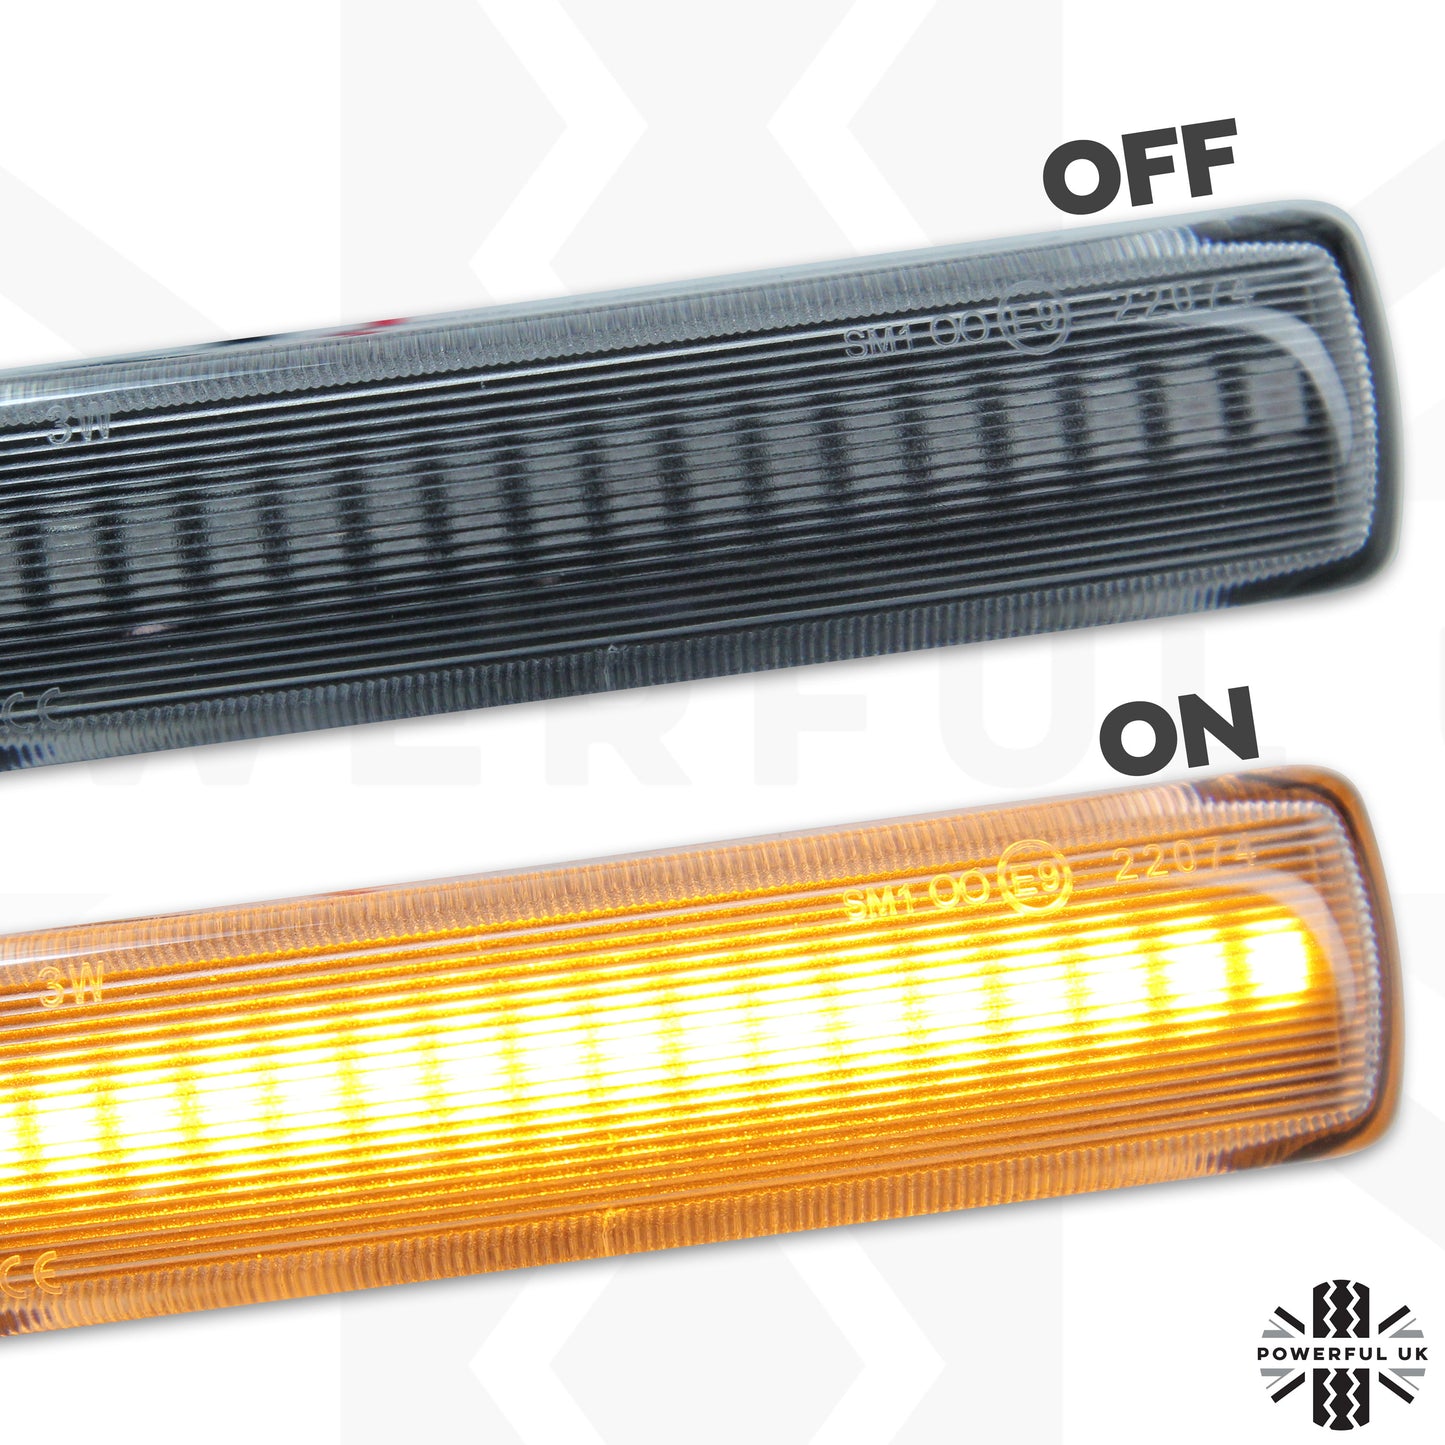 Side Repeaters for Land Rover Discovery 3 & 4  (Pair) - LED - Clear